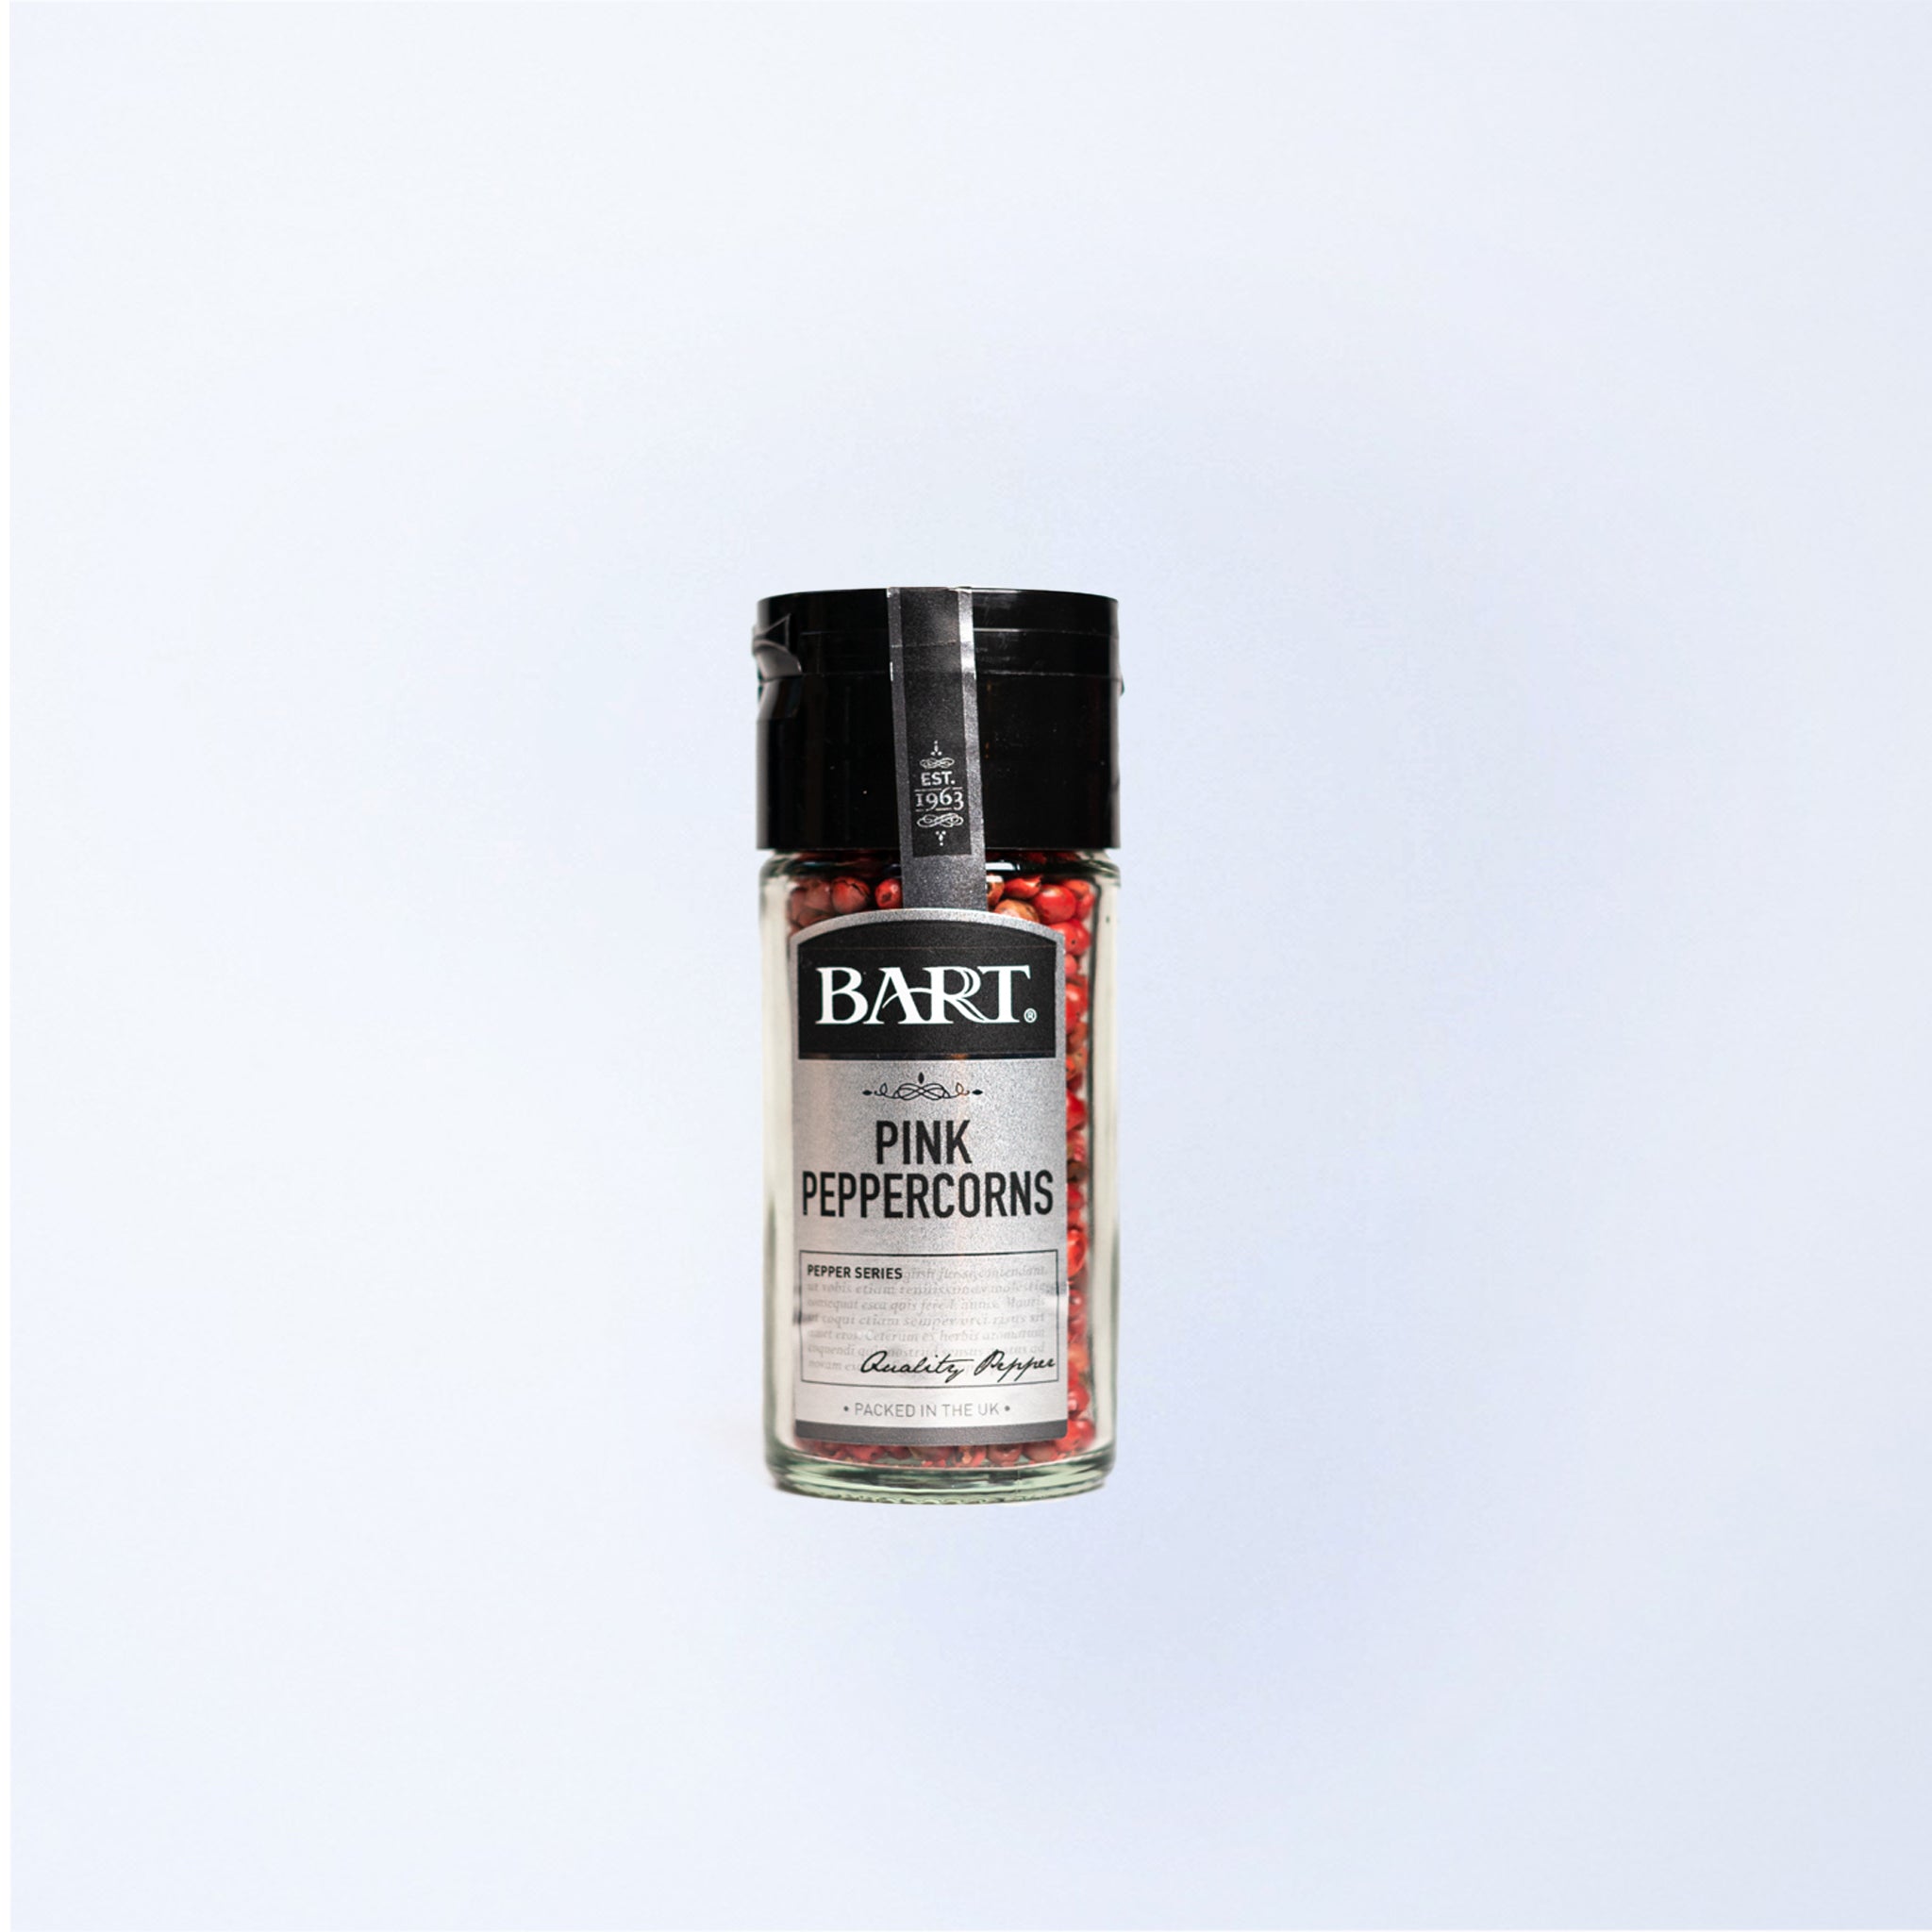 A glass jar of Bart Mixed Spice 30g.